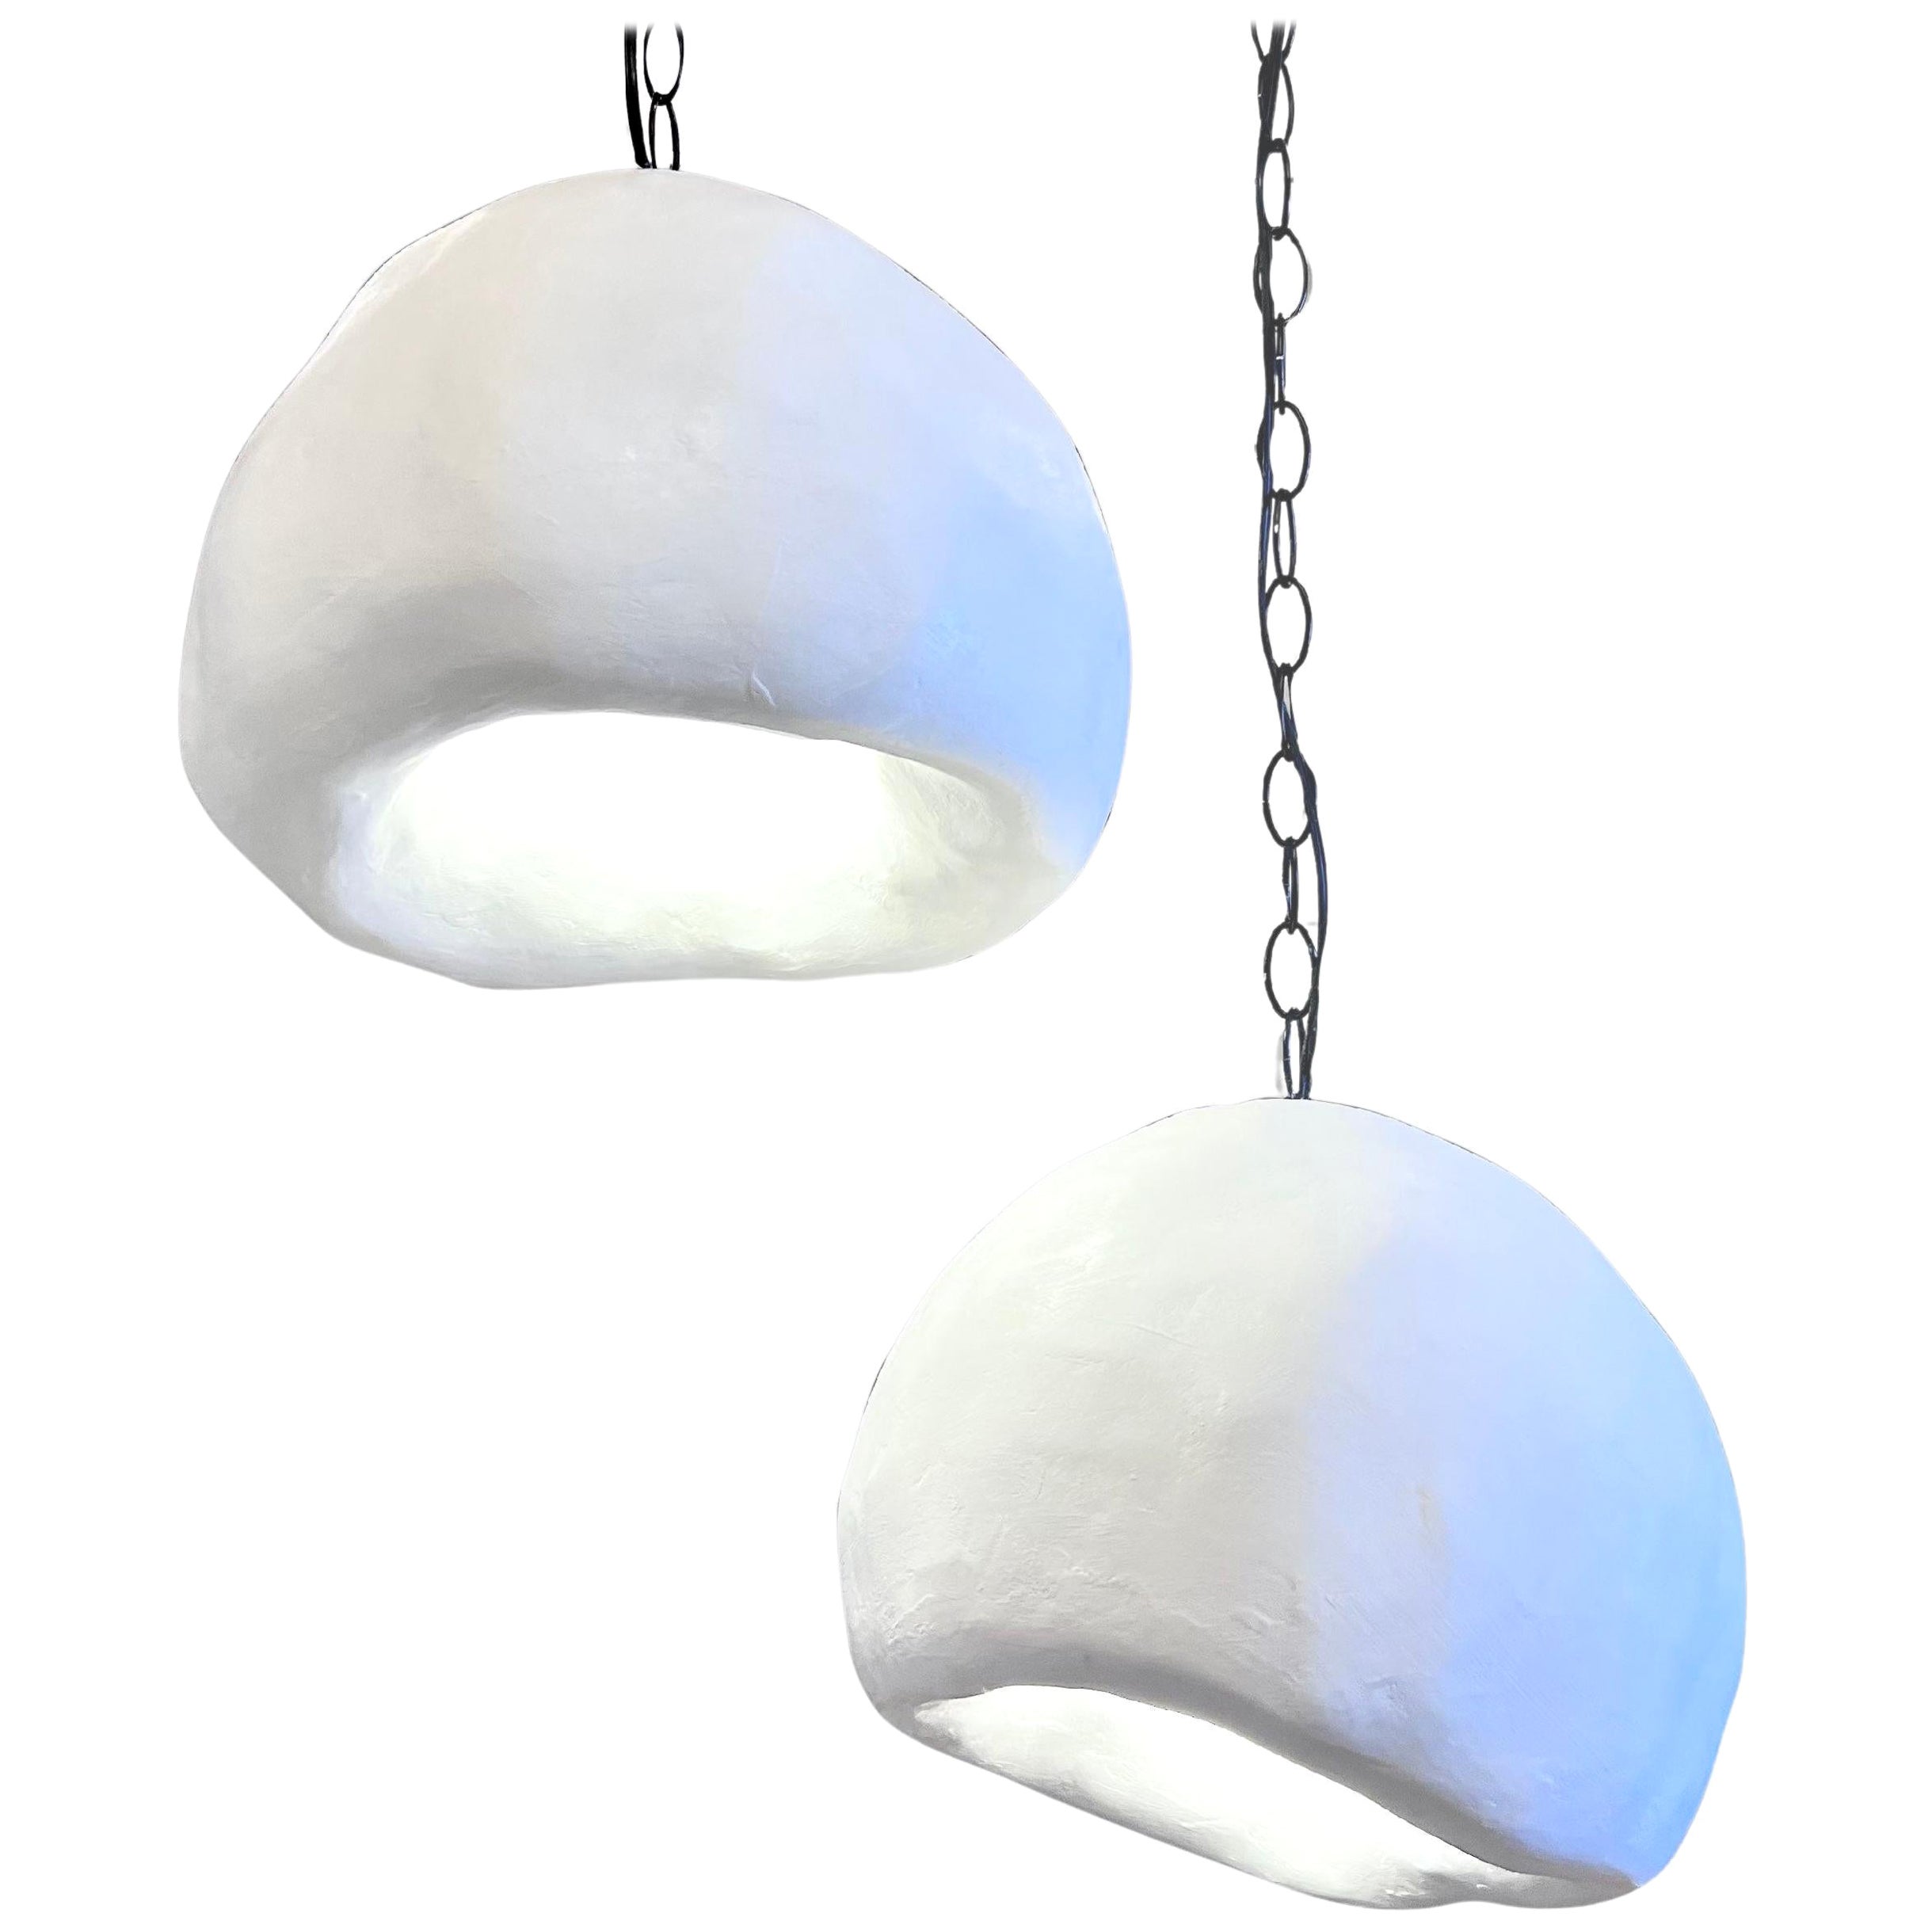 Biomorphic Suspension by Studio Chora, Organic Hanging Light Fixture, Made-to-order